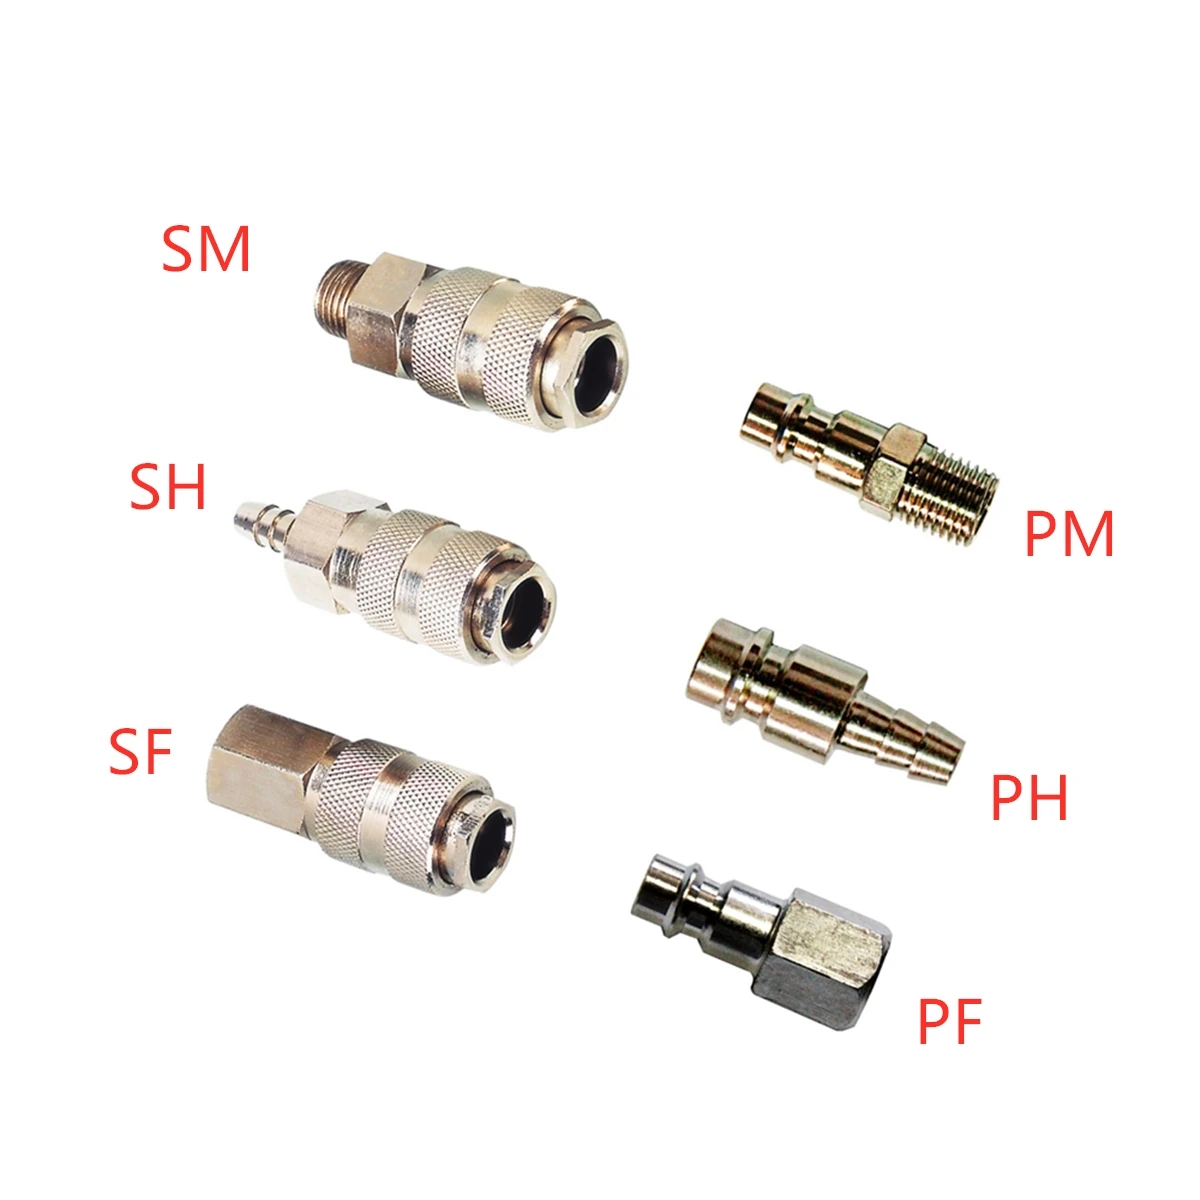 1PC Pneumatic Fitting European Standard Euro Type Air Line Quick Coupling Connector Coupler Adapter For Air Compressor